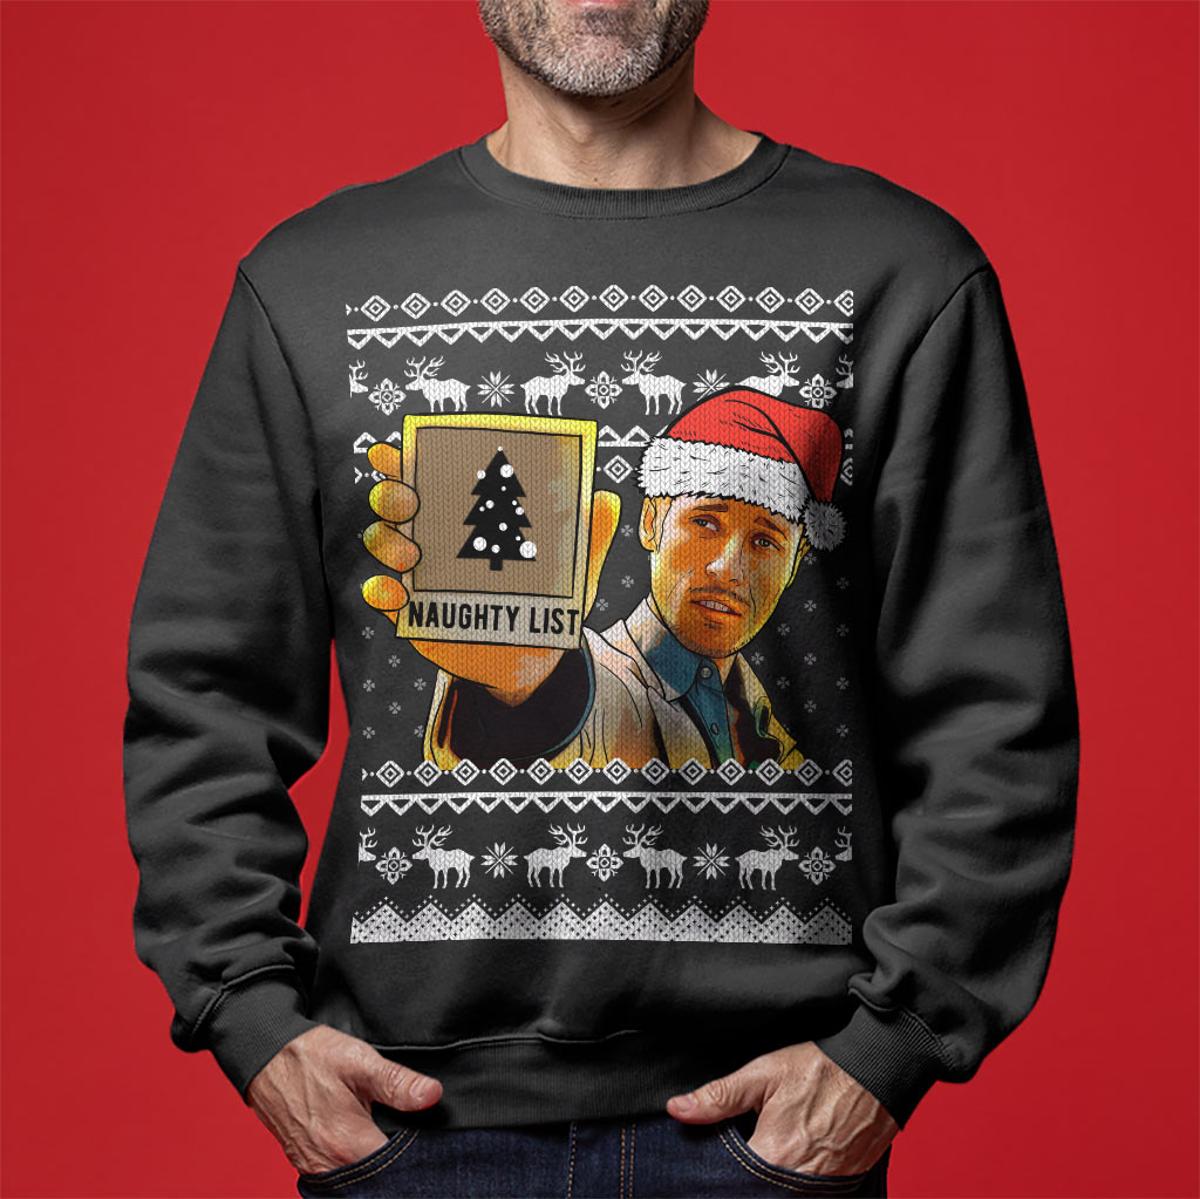 The Right Niggle Django Unchained Ugly Christmas Sweaters